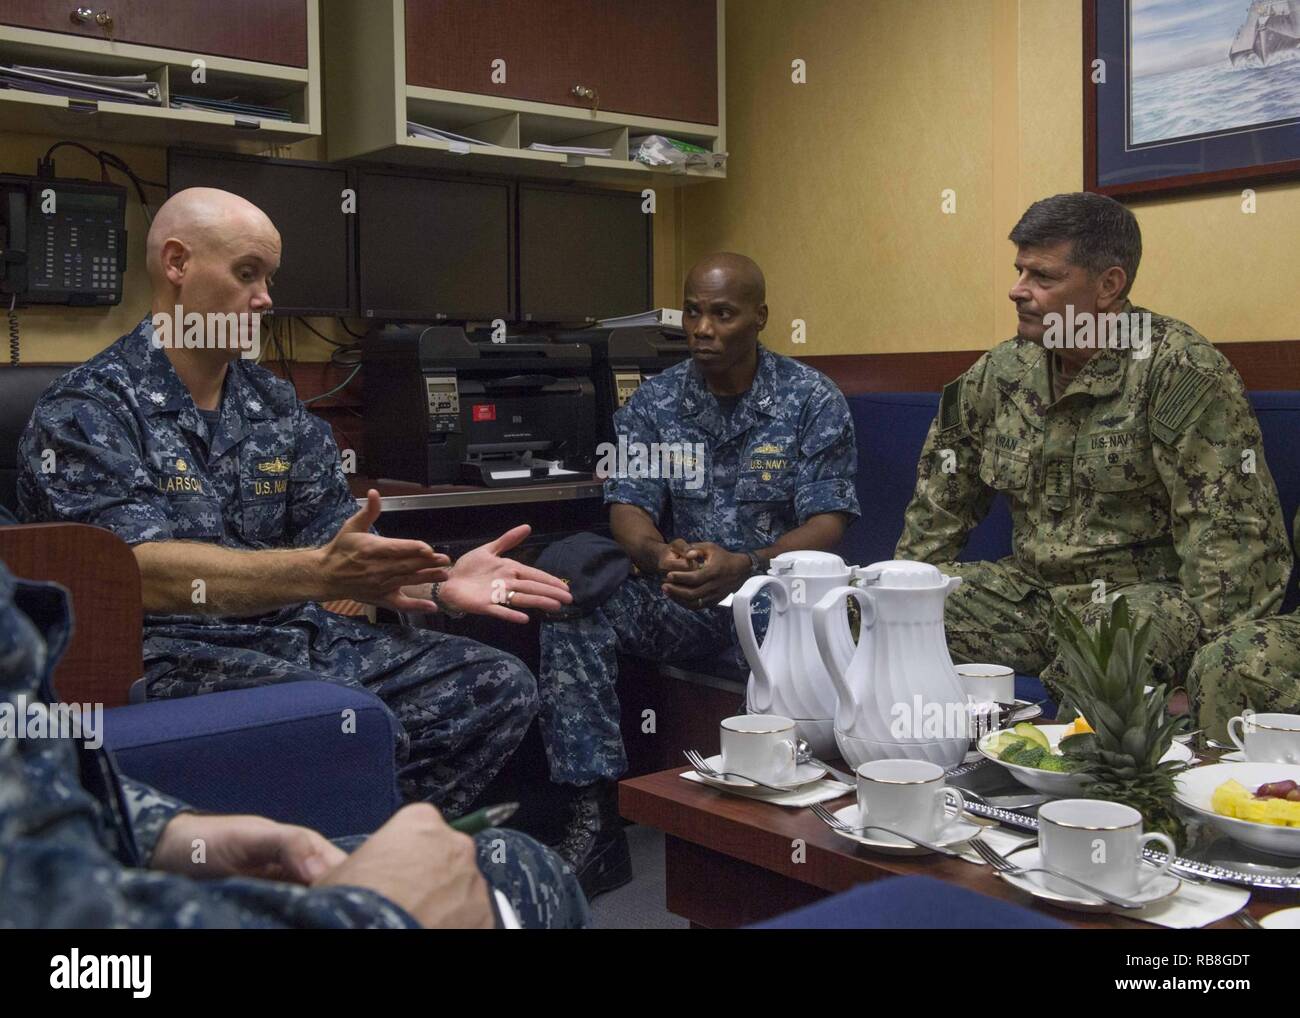 CHANGI, Singapore (Dec. 13, 2016) Vice Chief of Naval Operations Adm. William Moran speaks with Cmdr. Scott Larson, commanding officer, USS Coronado (LCS 4), left, and Capt. Lex Walker, deputy commodore, Destroyer Squadron 7, center, prior to a tour aboard Coronado. Currently on a rotational deployment in support of the Asia-Pacific Rebalance, Coronado is a fast and agile warship tailor-made to patrol the region's littorals and work hull-to-hull with partner navies, providing 7th Fleet with the flexible capabilities it needs now and in the future. Stock Photo